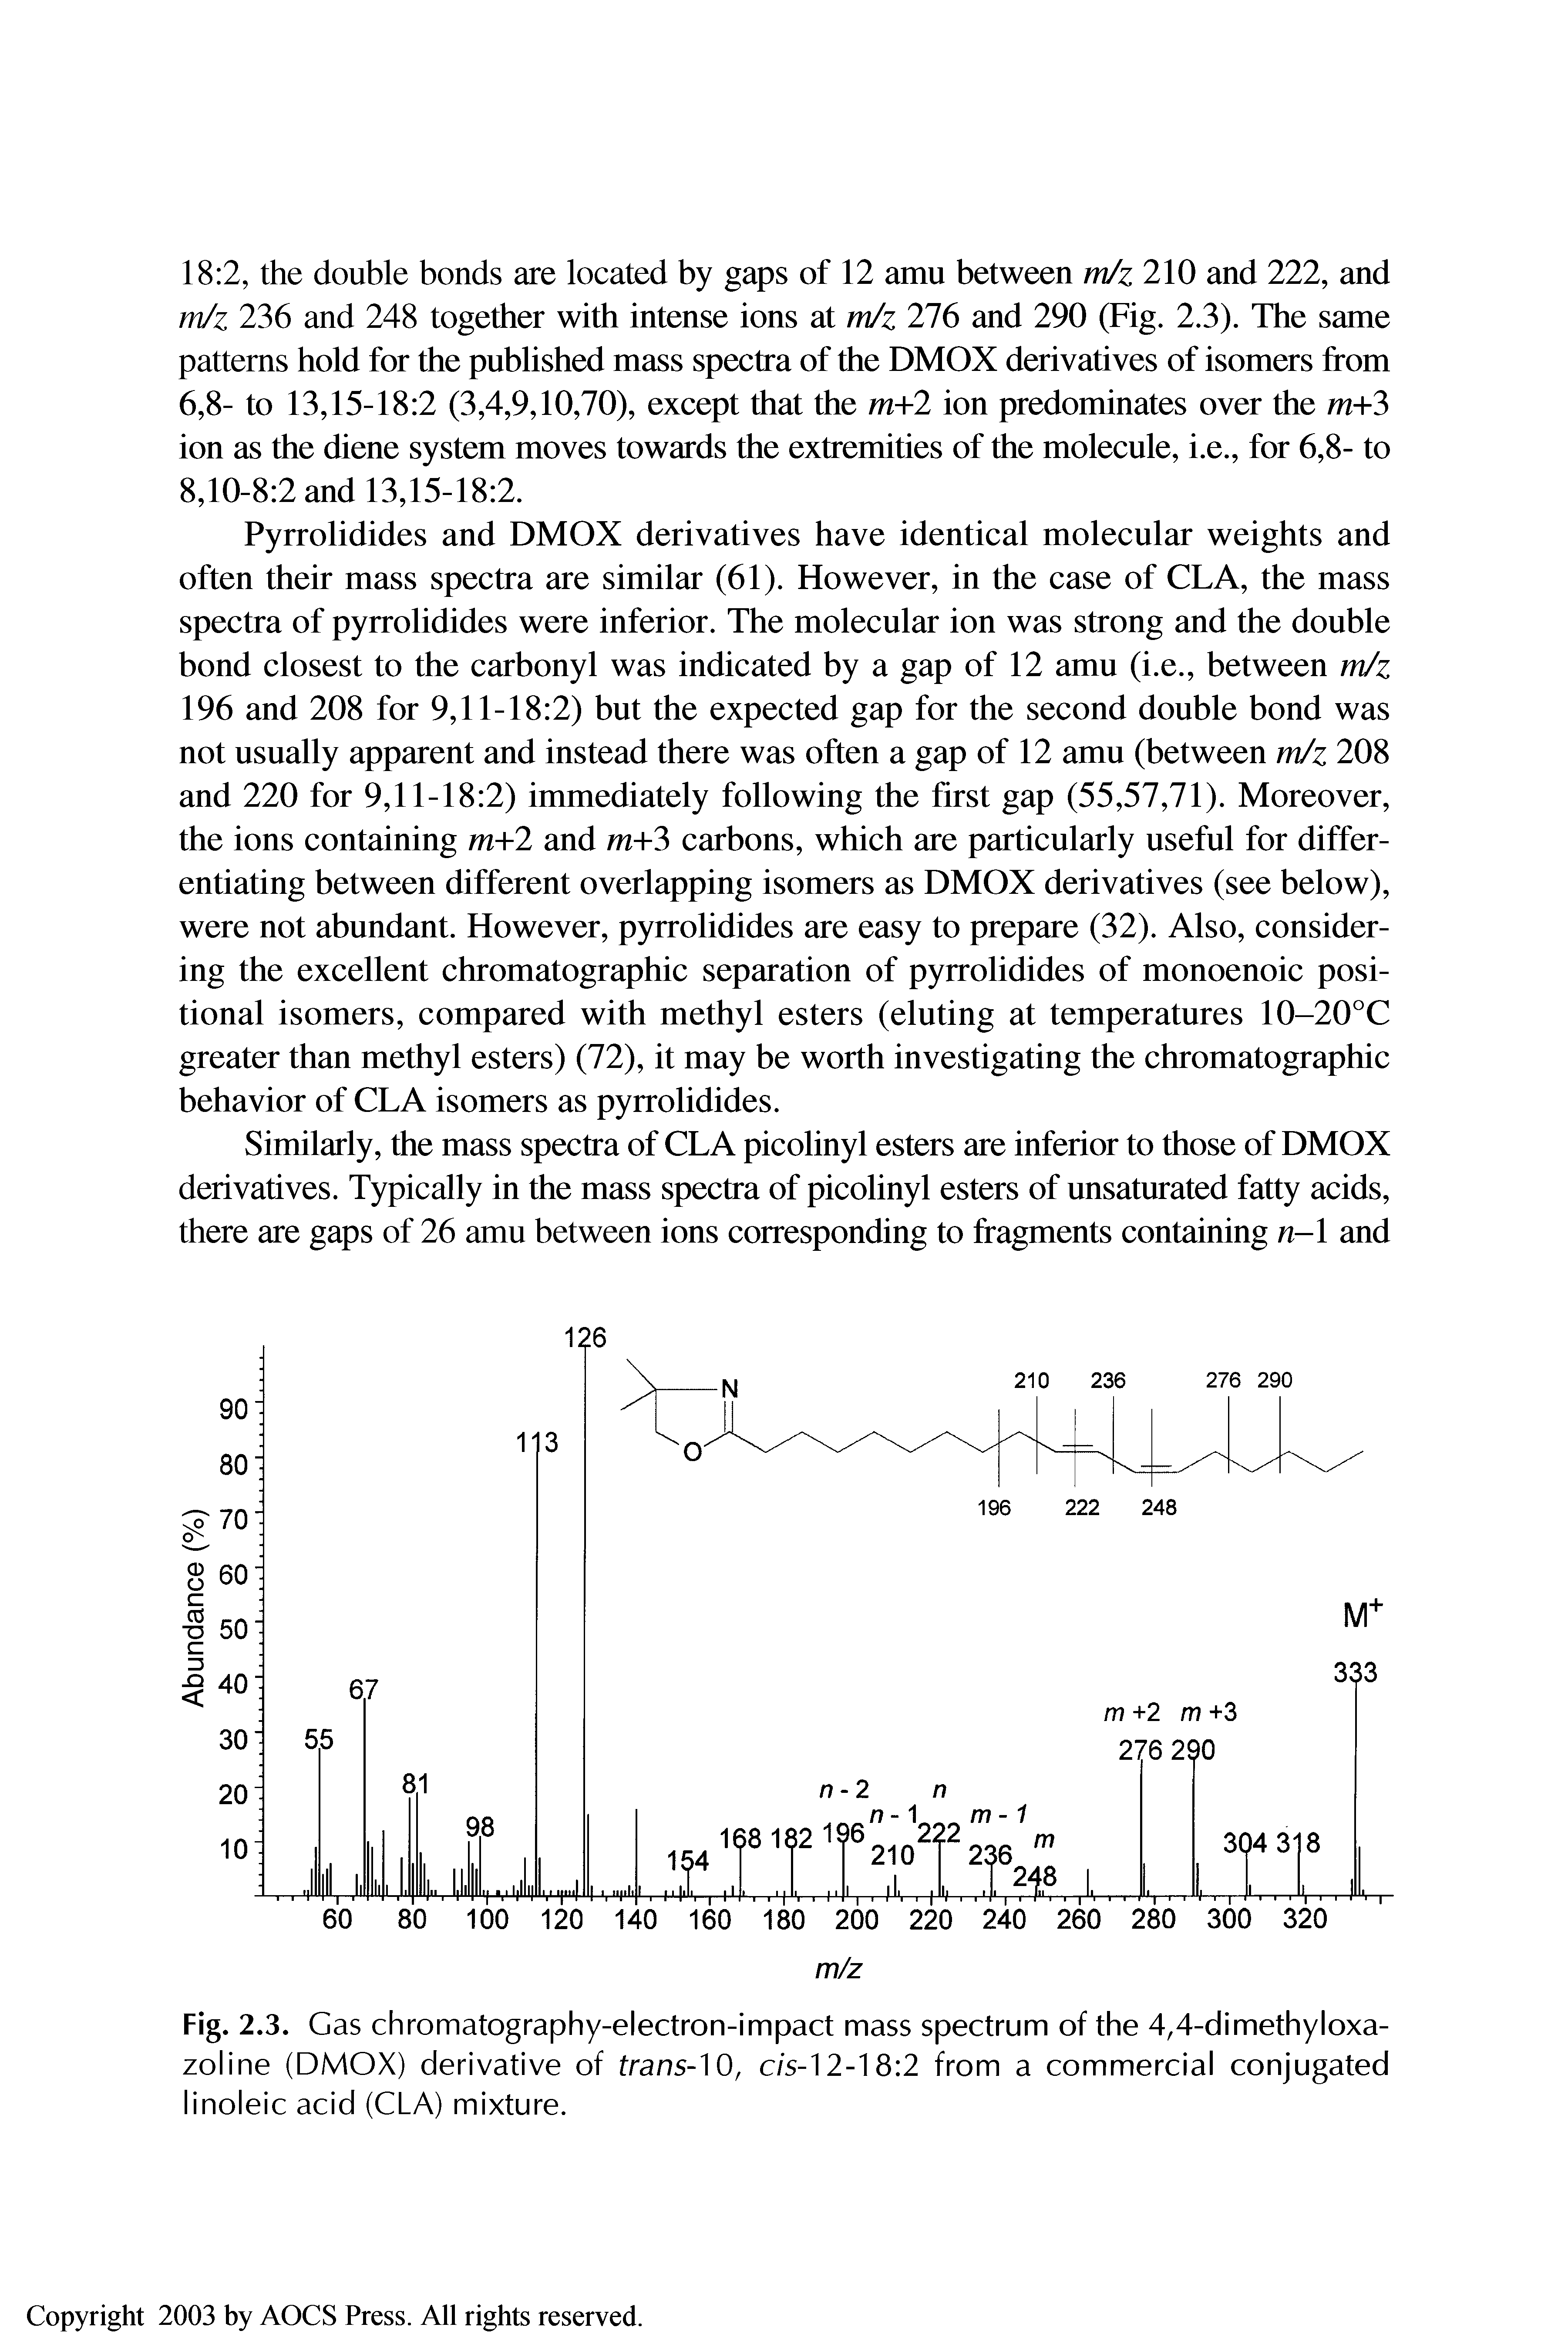 Fig. 2.3. Gas chromatography-electron-impact mass spectrum of the 4,4-dimethyloxa-zoline (DMOX) derivative of trans- 0, c/s-12-18 2 from a commercial conjugated linoleic acid (CLA) mixture.